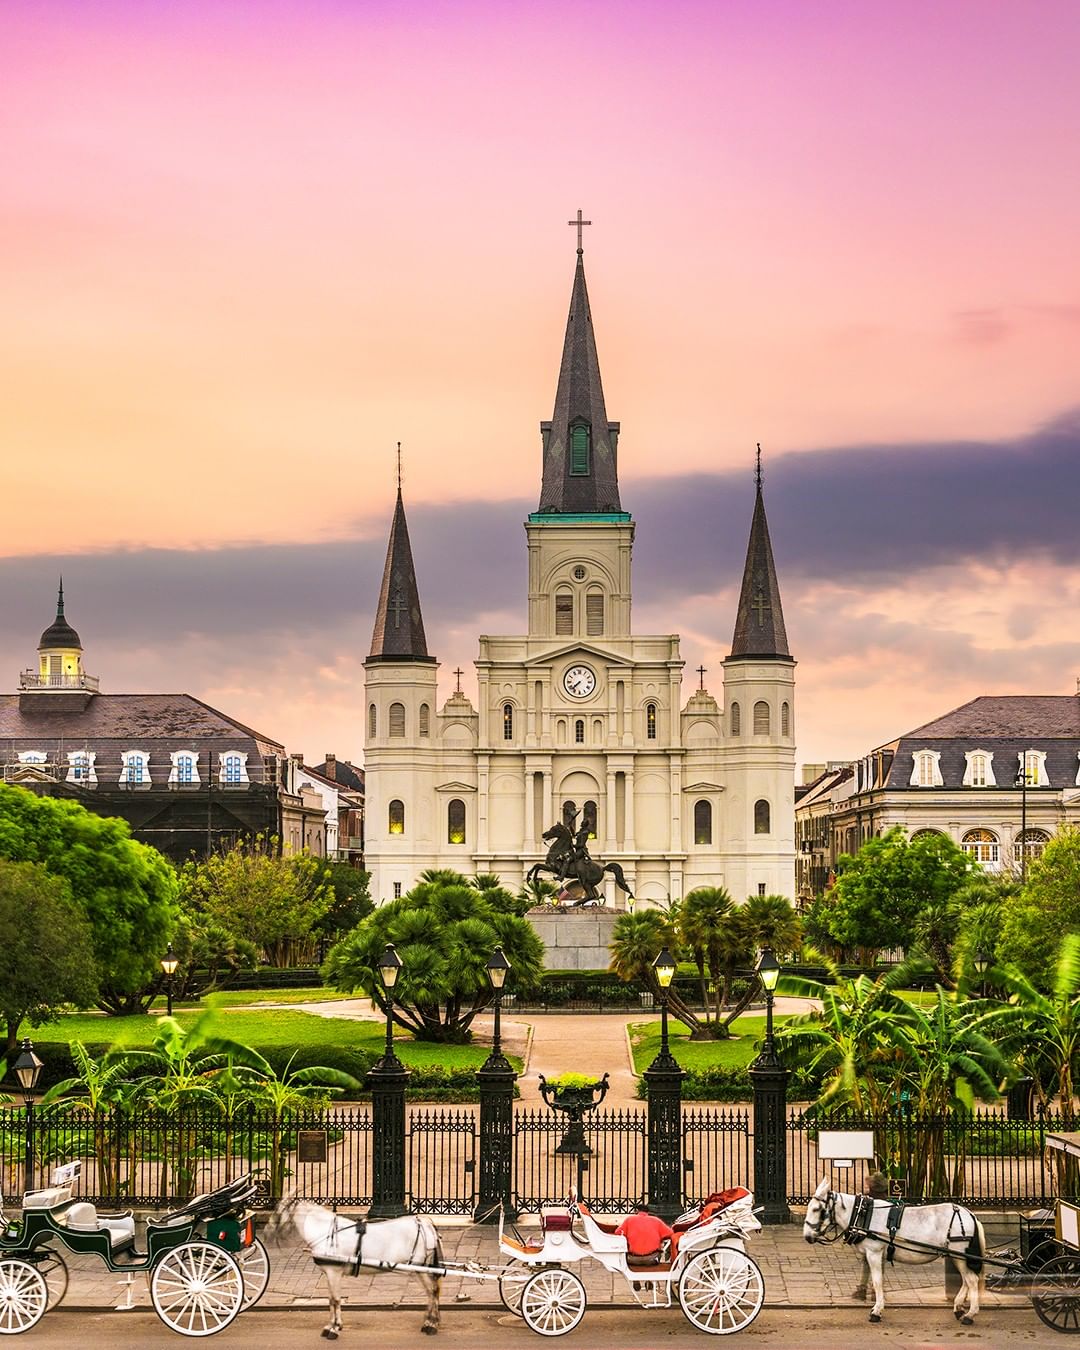 White St. Louis Cathedral with a purple sunset in New Orleans. Photo by Instagram user @tripadvisor